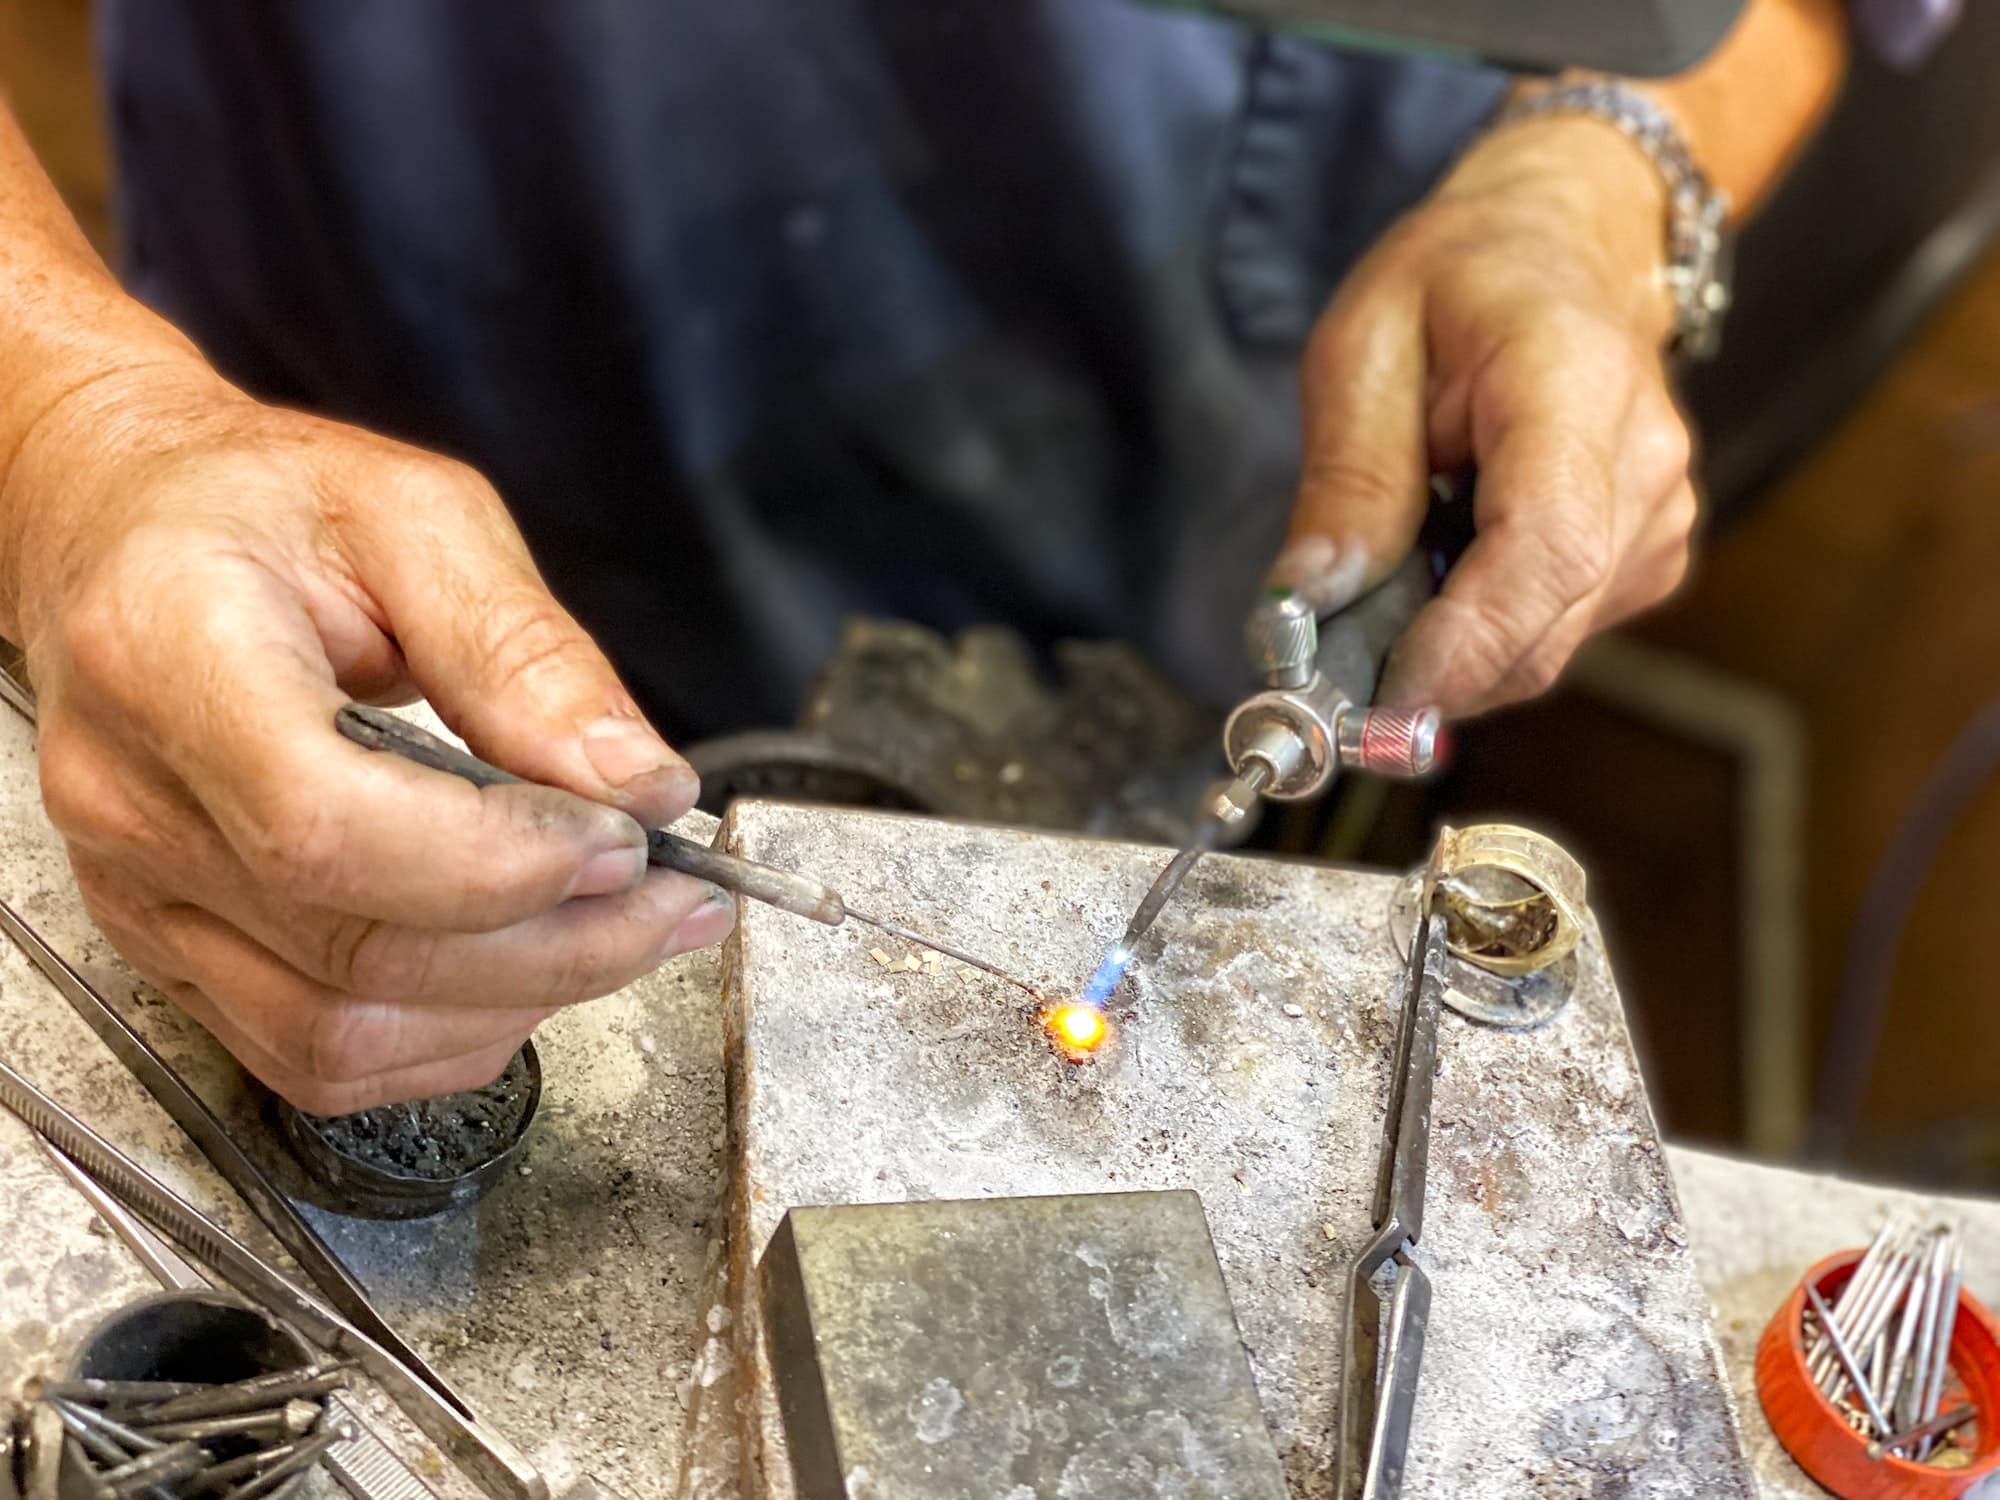 Goldsmith works on repairing a gold ring with a 900 degree(f) propane flame